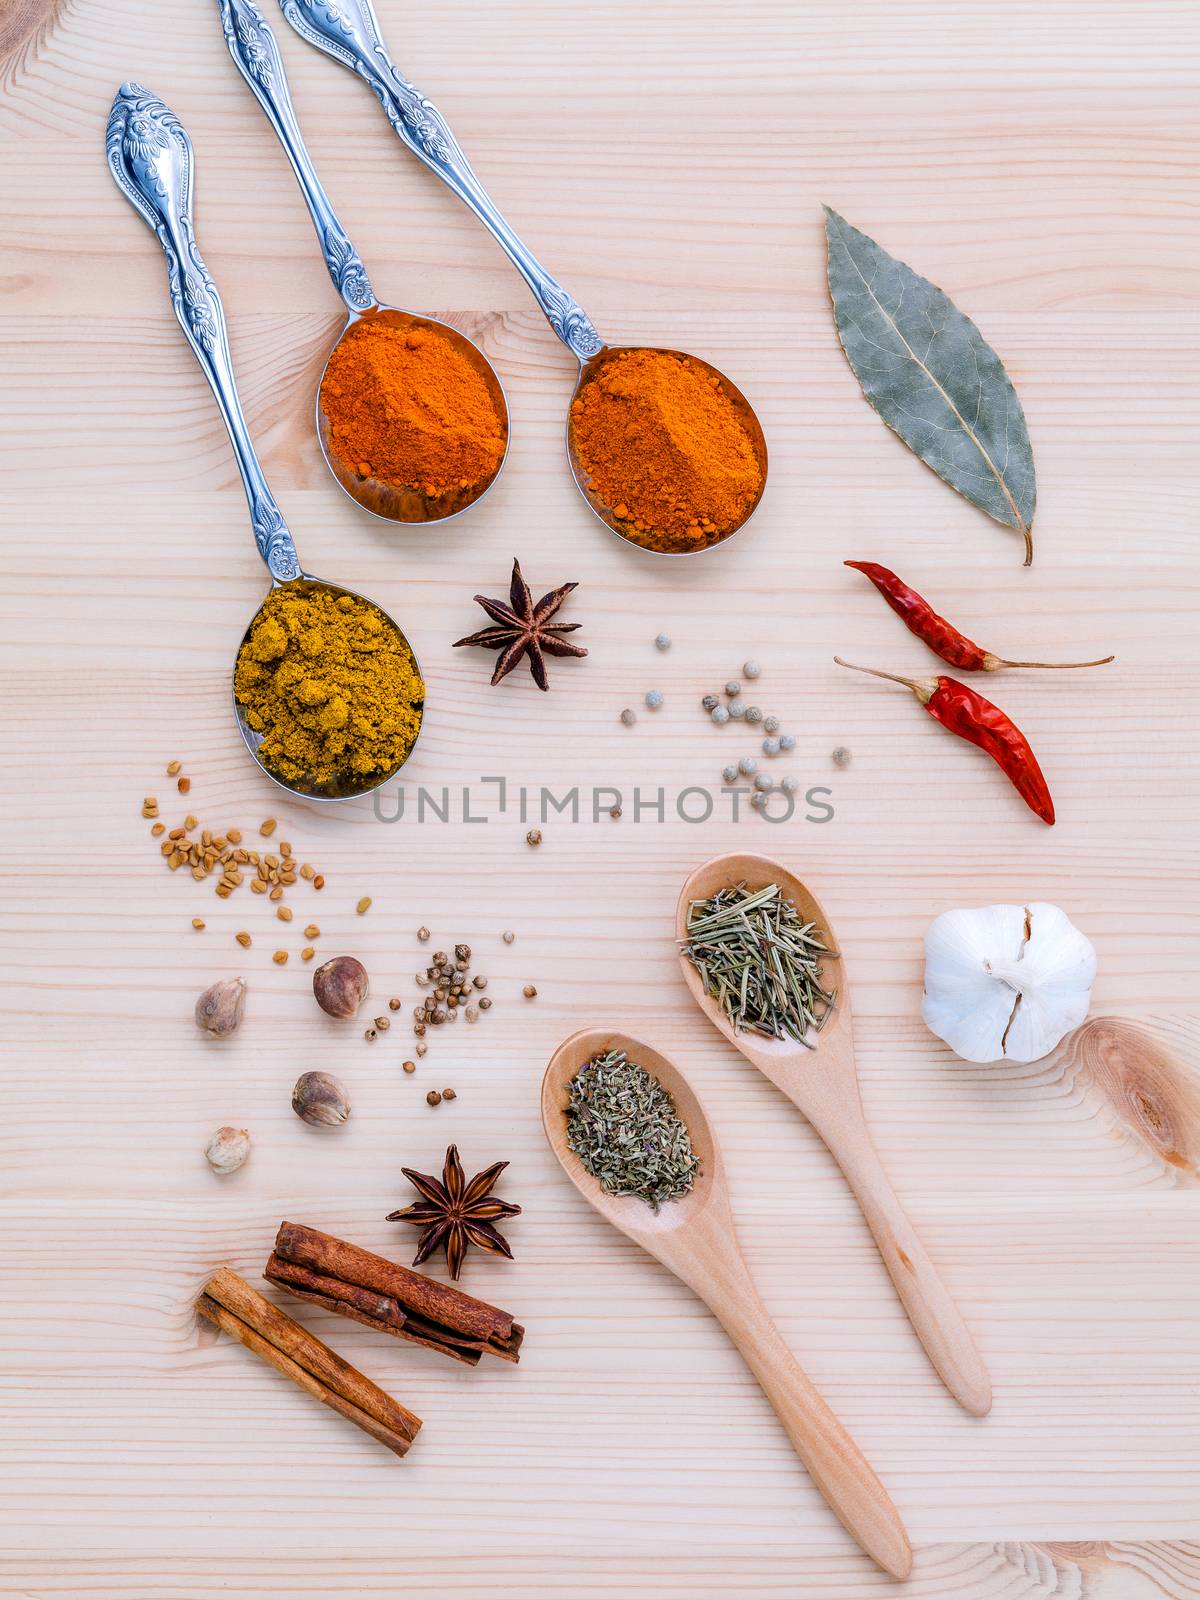 Assorted of dried spices white pepper,cumin ,bay leaf,cinnamon,star anise,thyme,ginger ,chili ,garlic  and rosemary on wooden background.